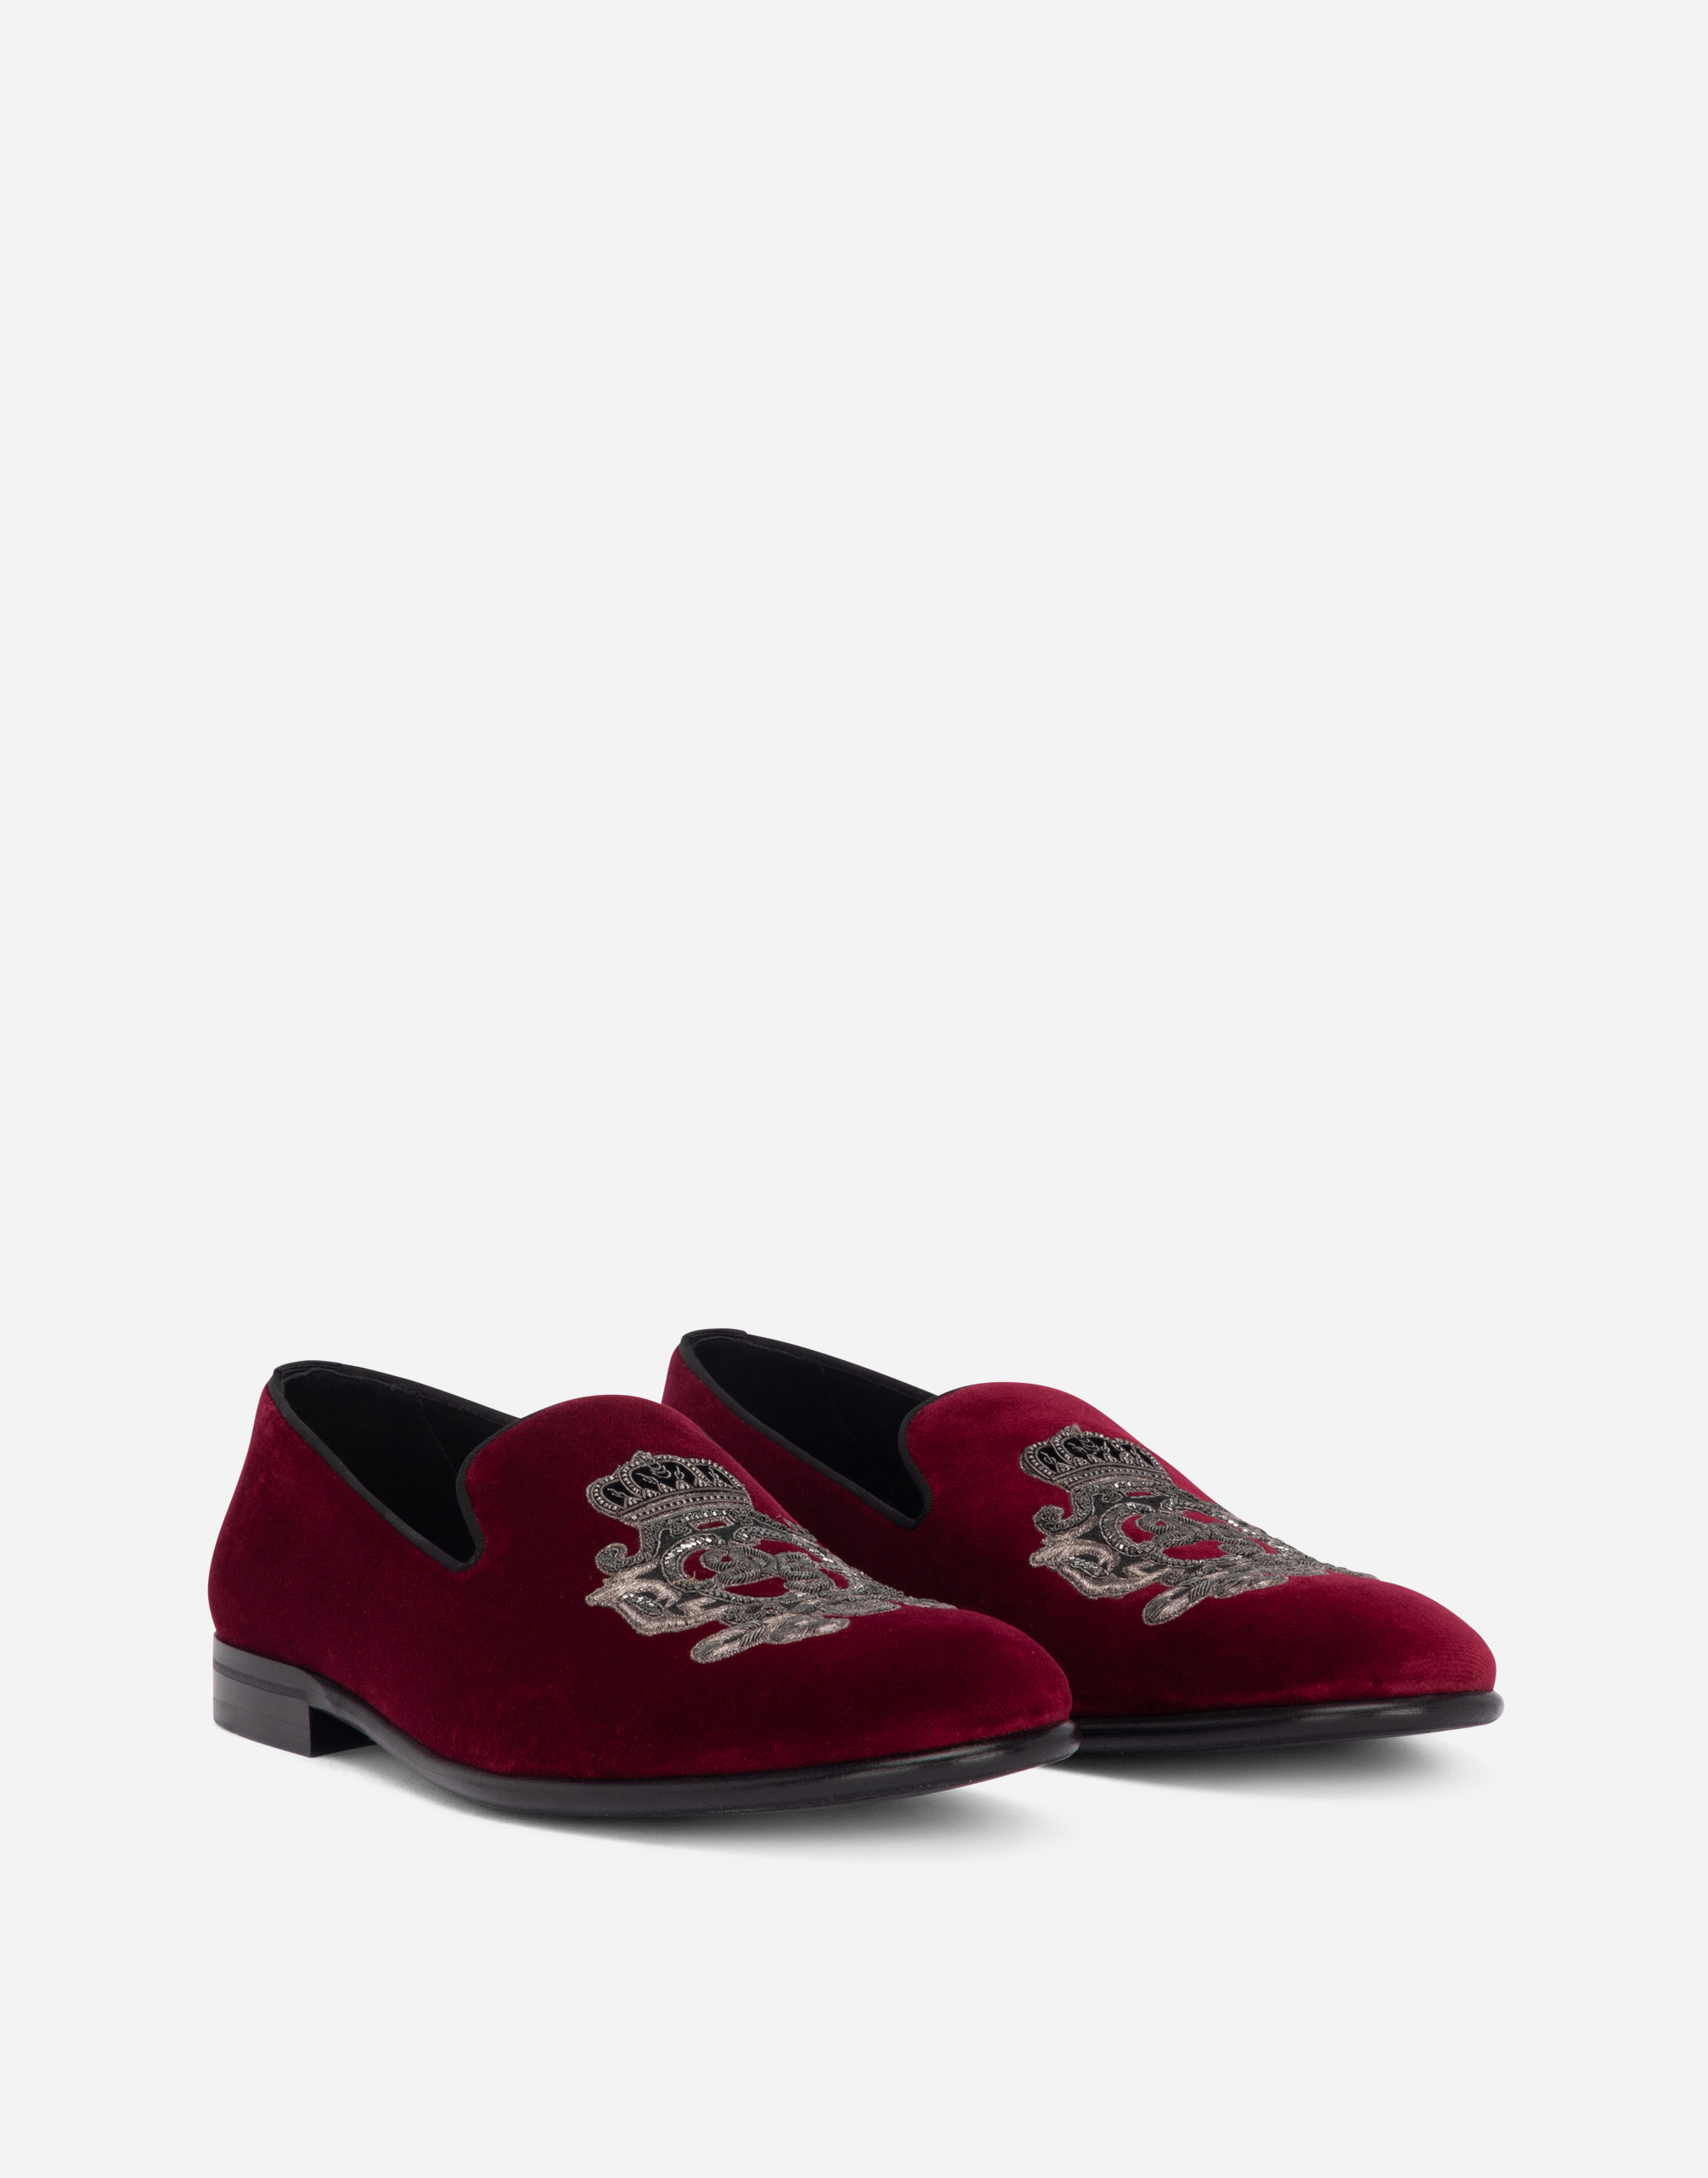 Dolce Gabbana Men's Embroidered Coat Of Arms Loafer Slippers Bordeaux | ModeSens